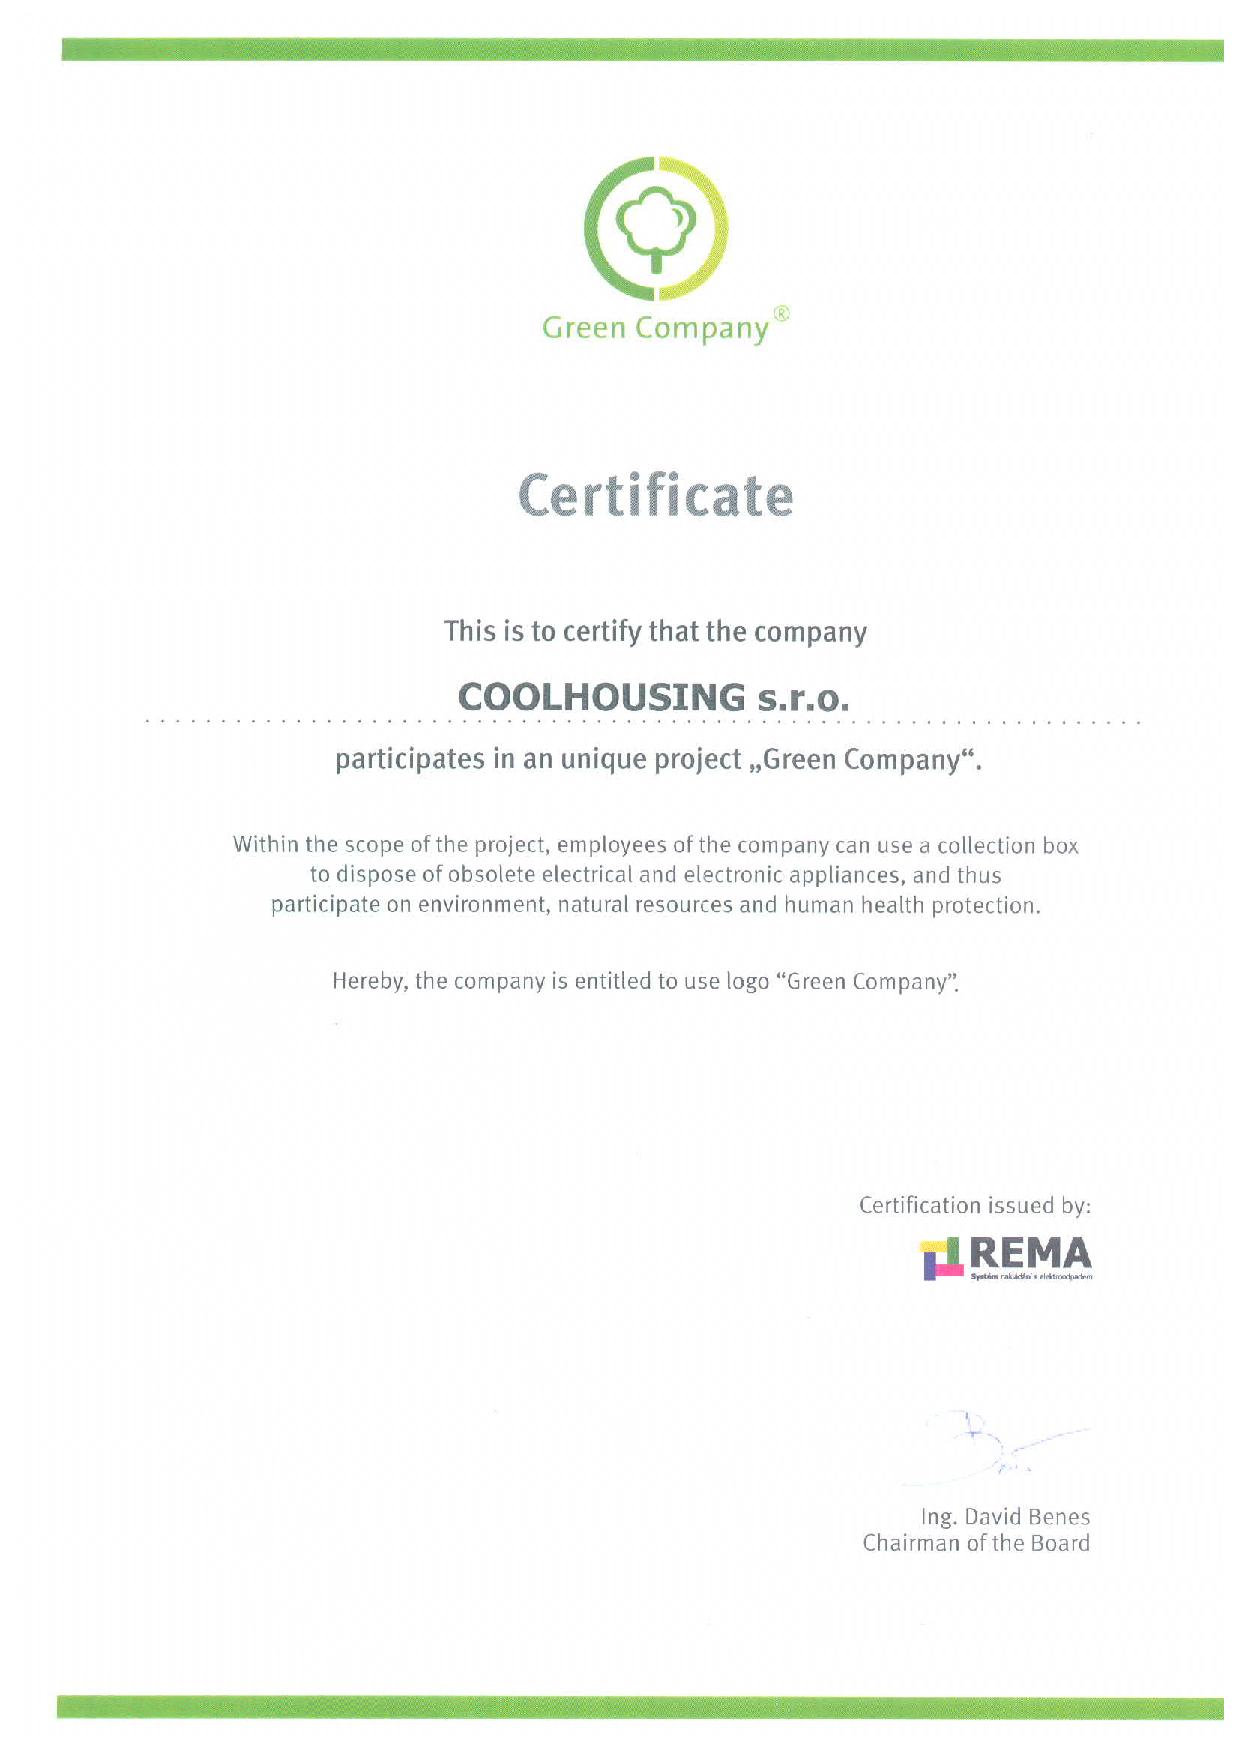 This is to certify that the company COOLHOUSING s.r.o. participates in an unique projeck "Green Company"